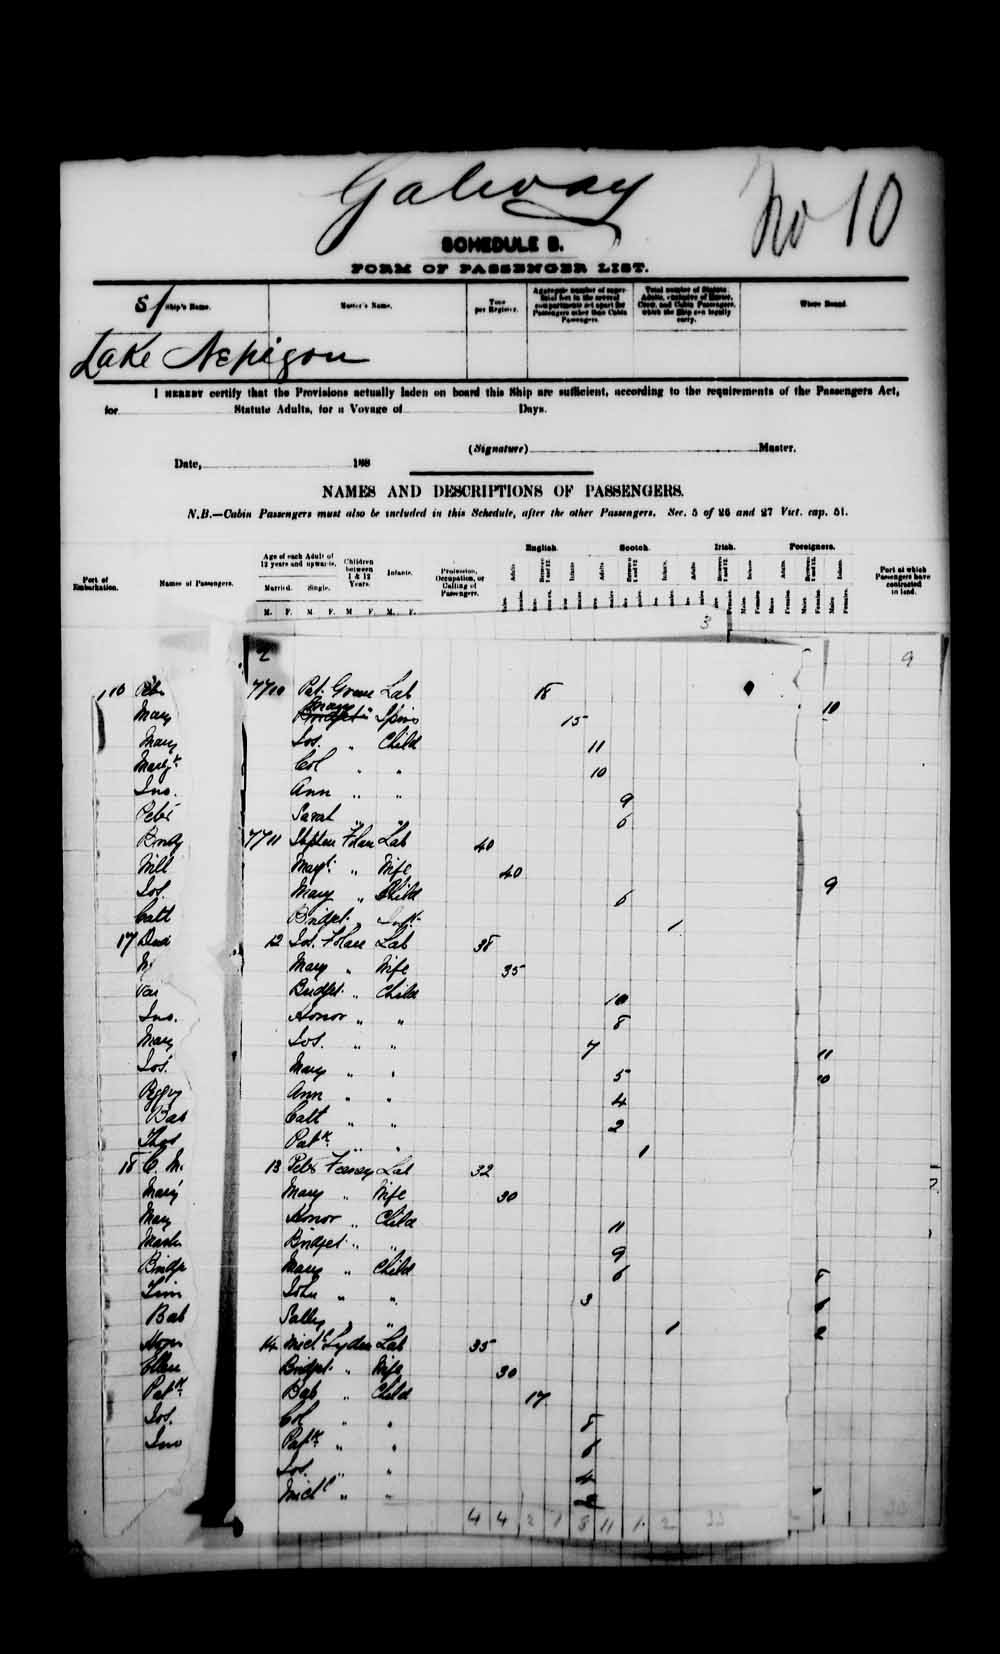 Digitized page of Passenger Lists for Image No.: e003541458